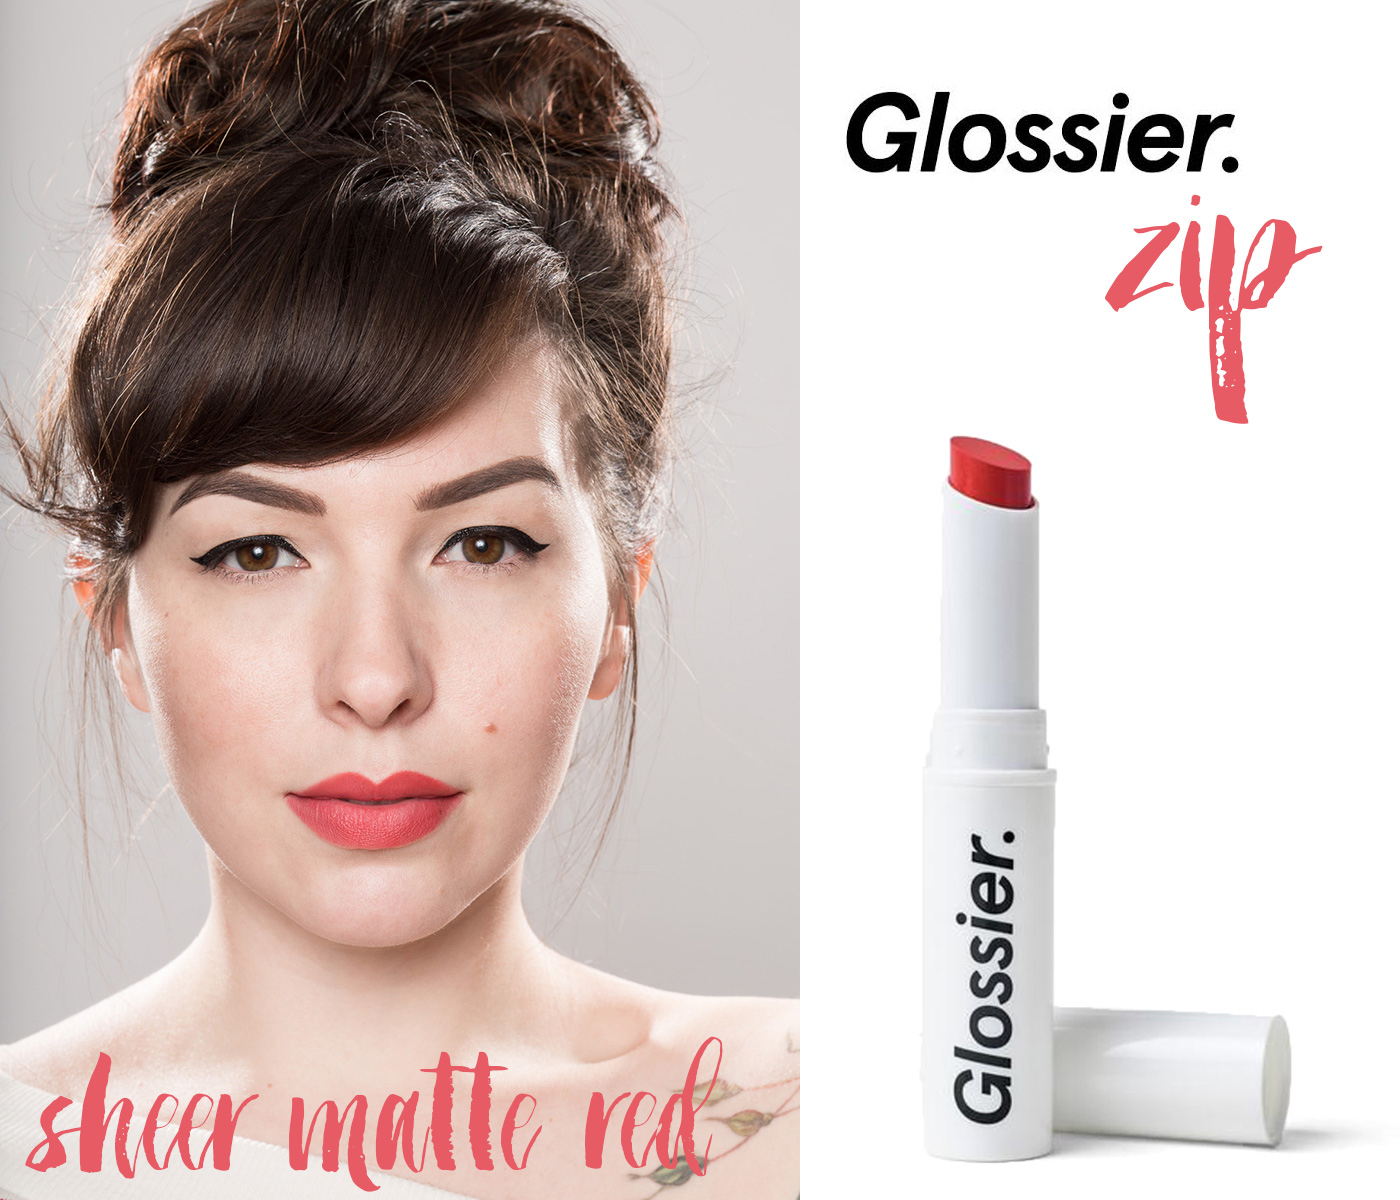 finding the perfect red lipstick: glossier zip generation g sheer matte red lipstick